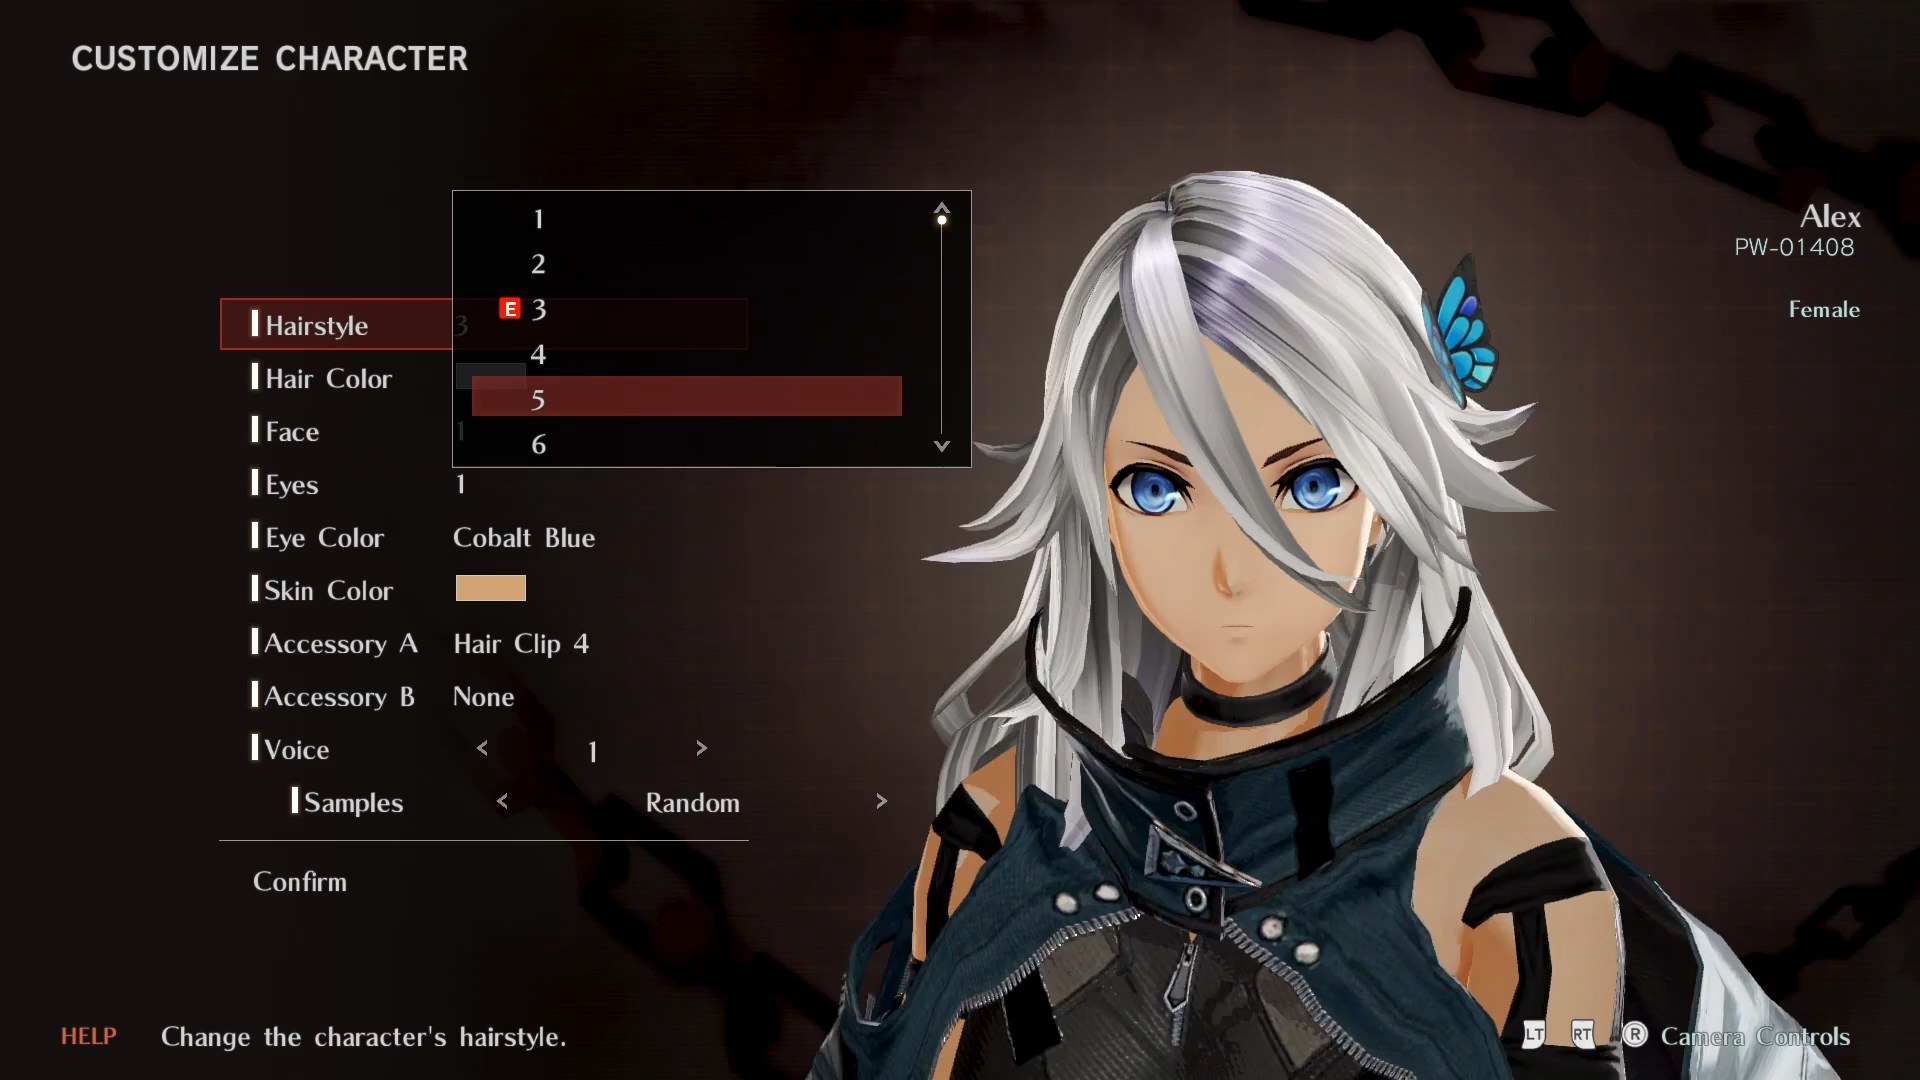 Preview: 'God Eater 3' forges its own path in action RPG genre